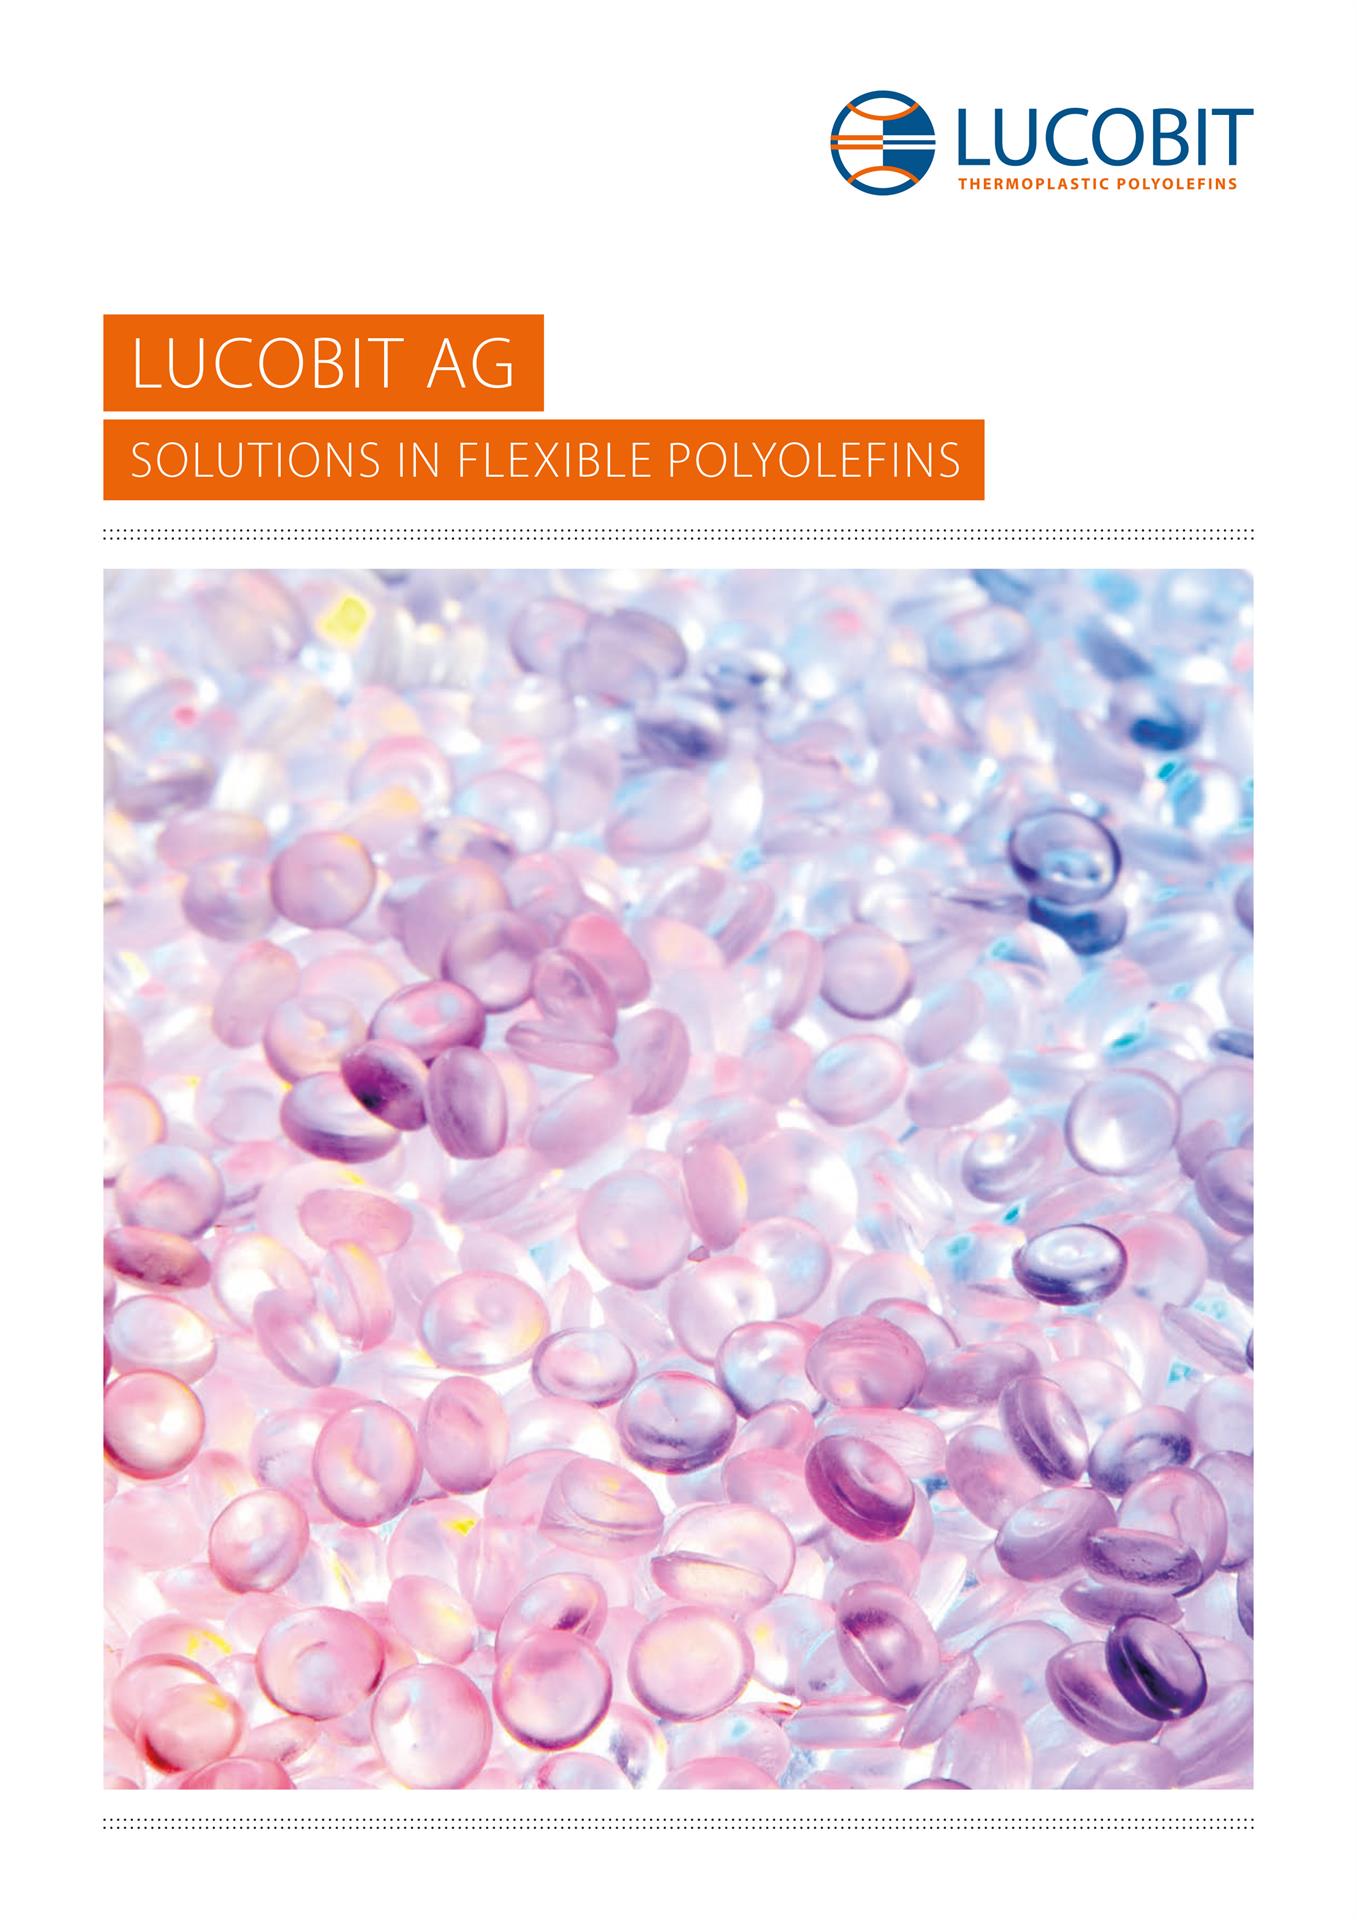 LUCOBIT Brochure - LUCOBIT AG SOLUTIONS IN FLEXIBLE POLYOLEFINS